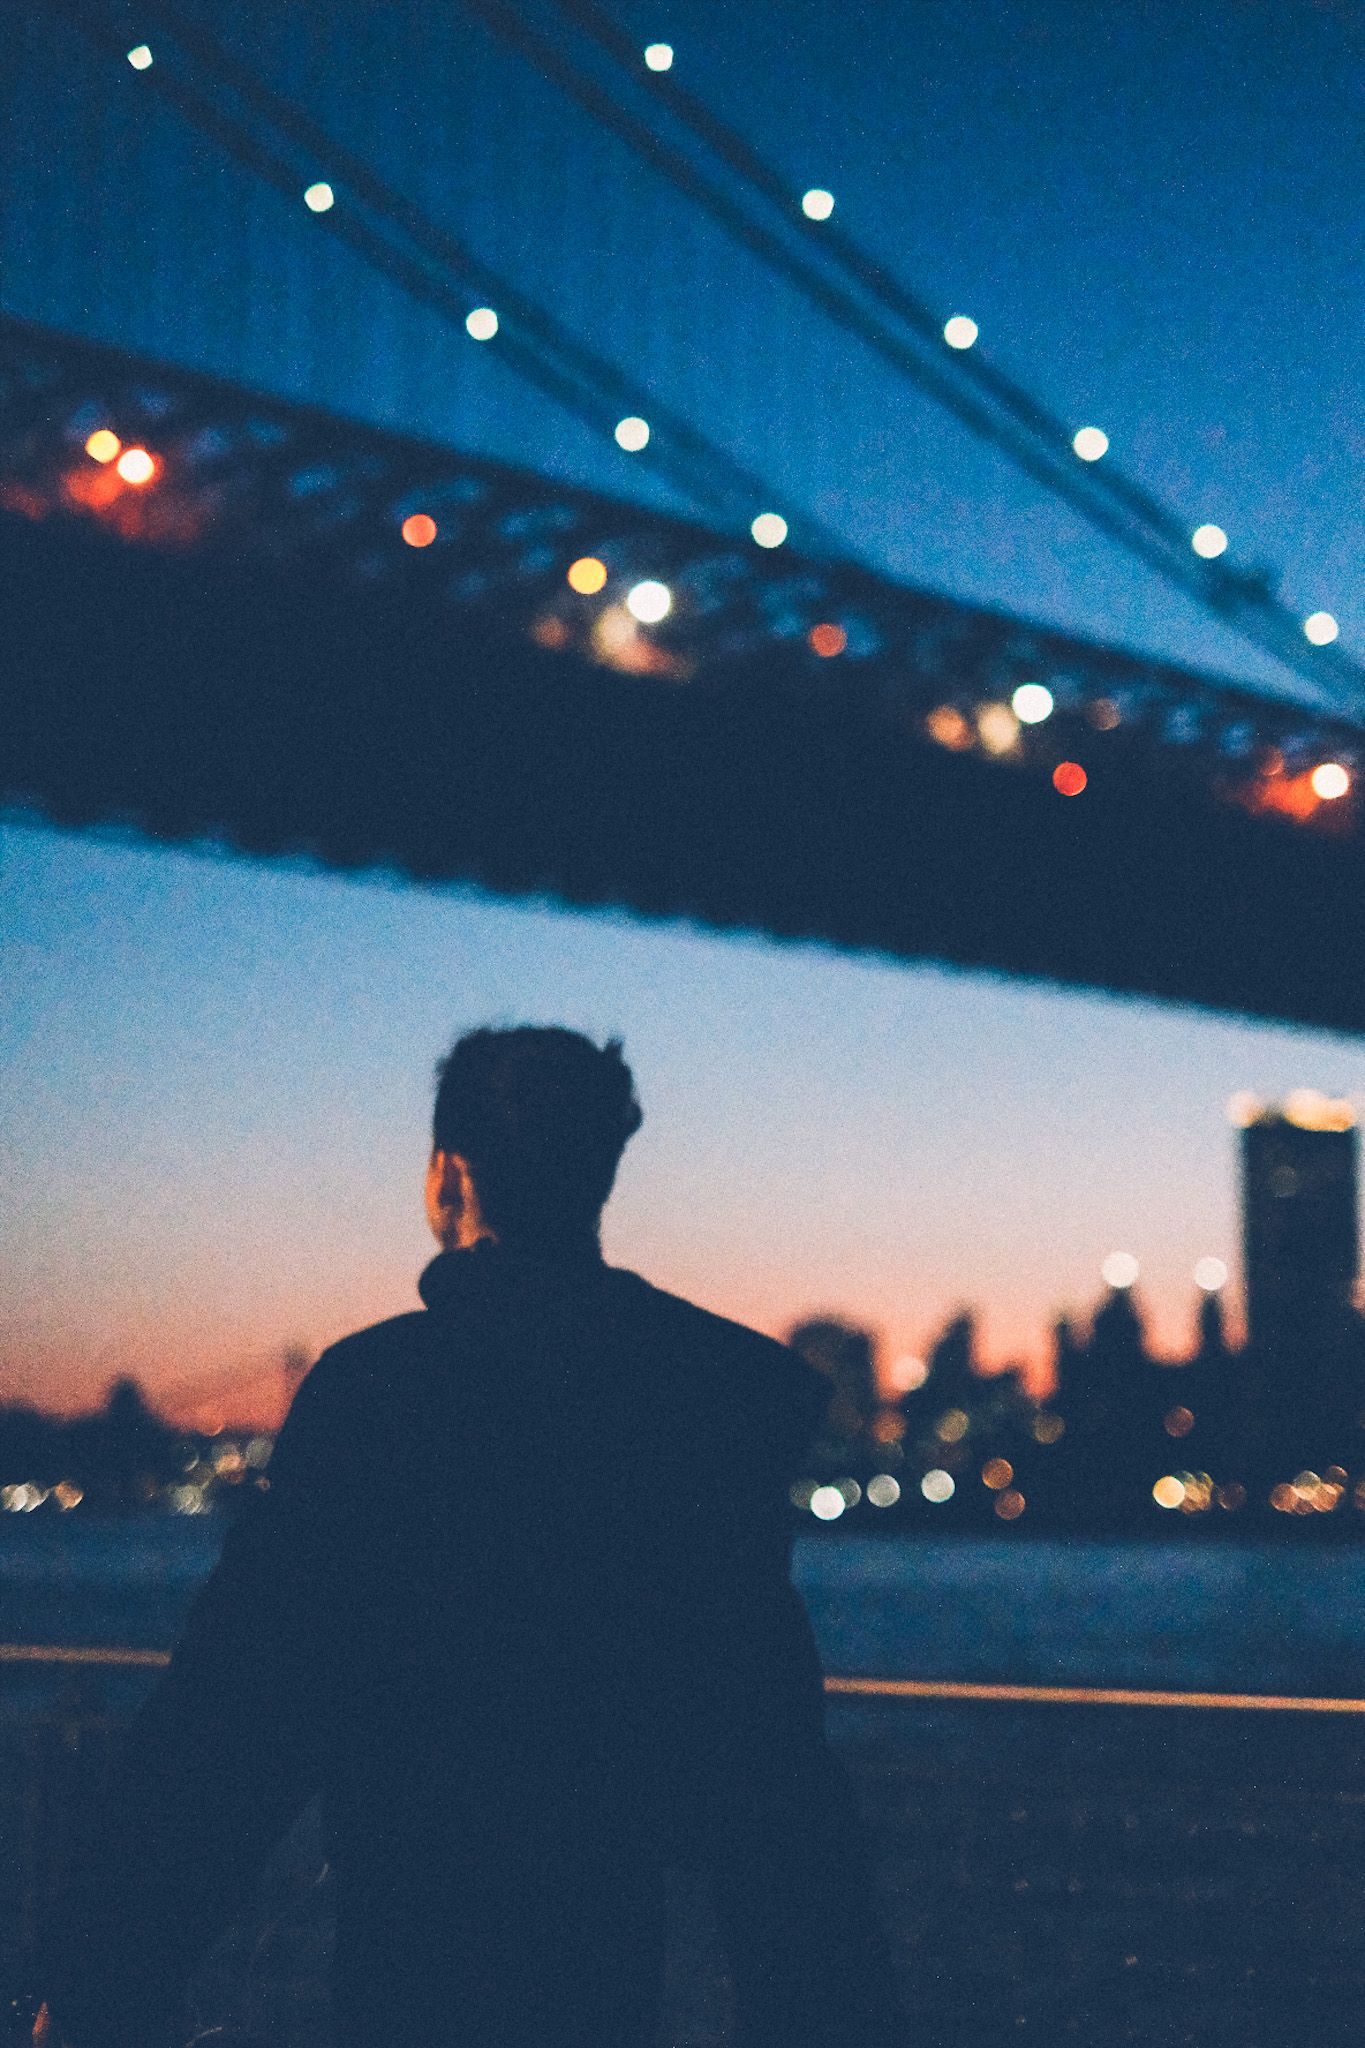 A person walks in front of the camera, the background showing the Williamsburg Bridge and the Manhattan skyline at sunset.